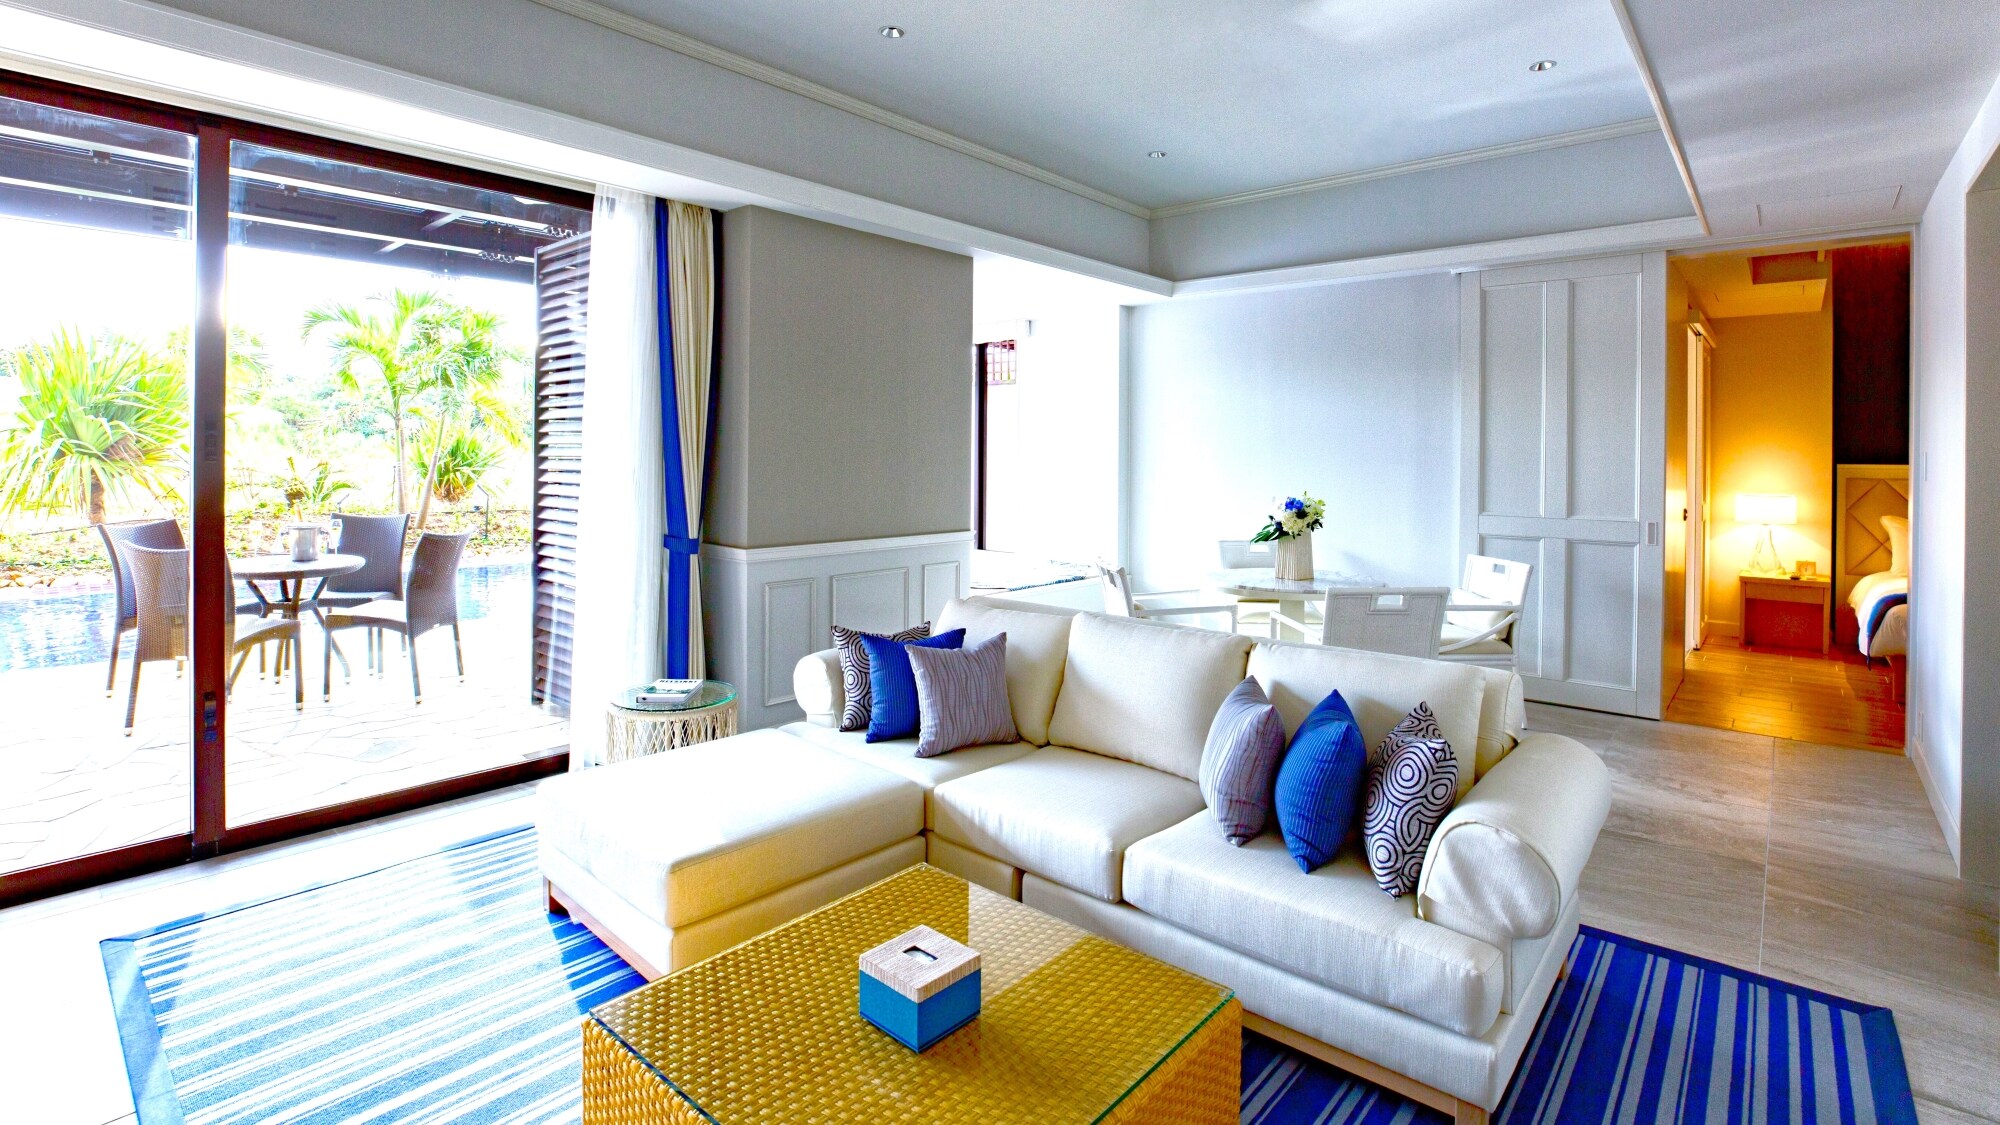 [Mirage Floor/Garden Pool Suite] 2 bedrooms over 100 square meters surrounded by water and greenery